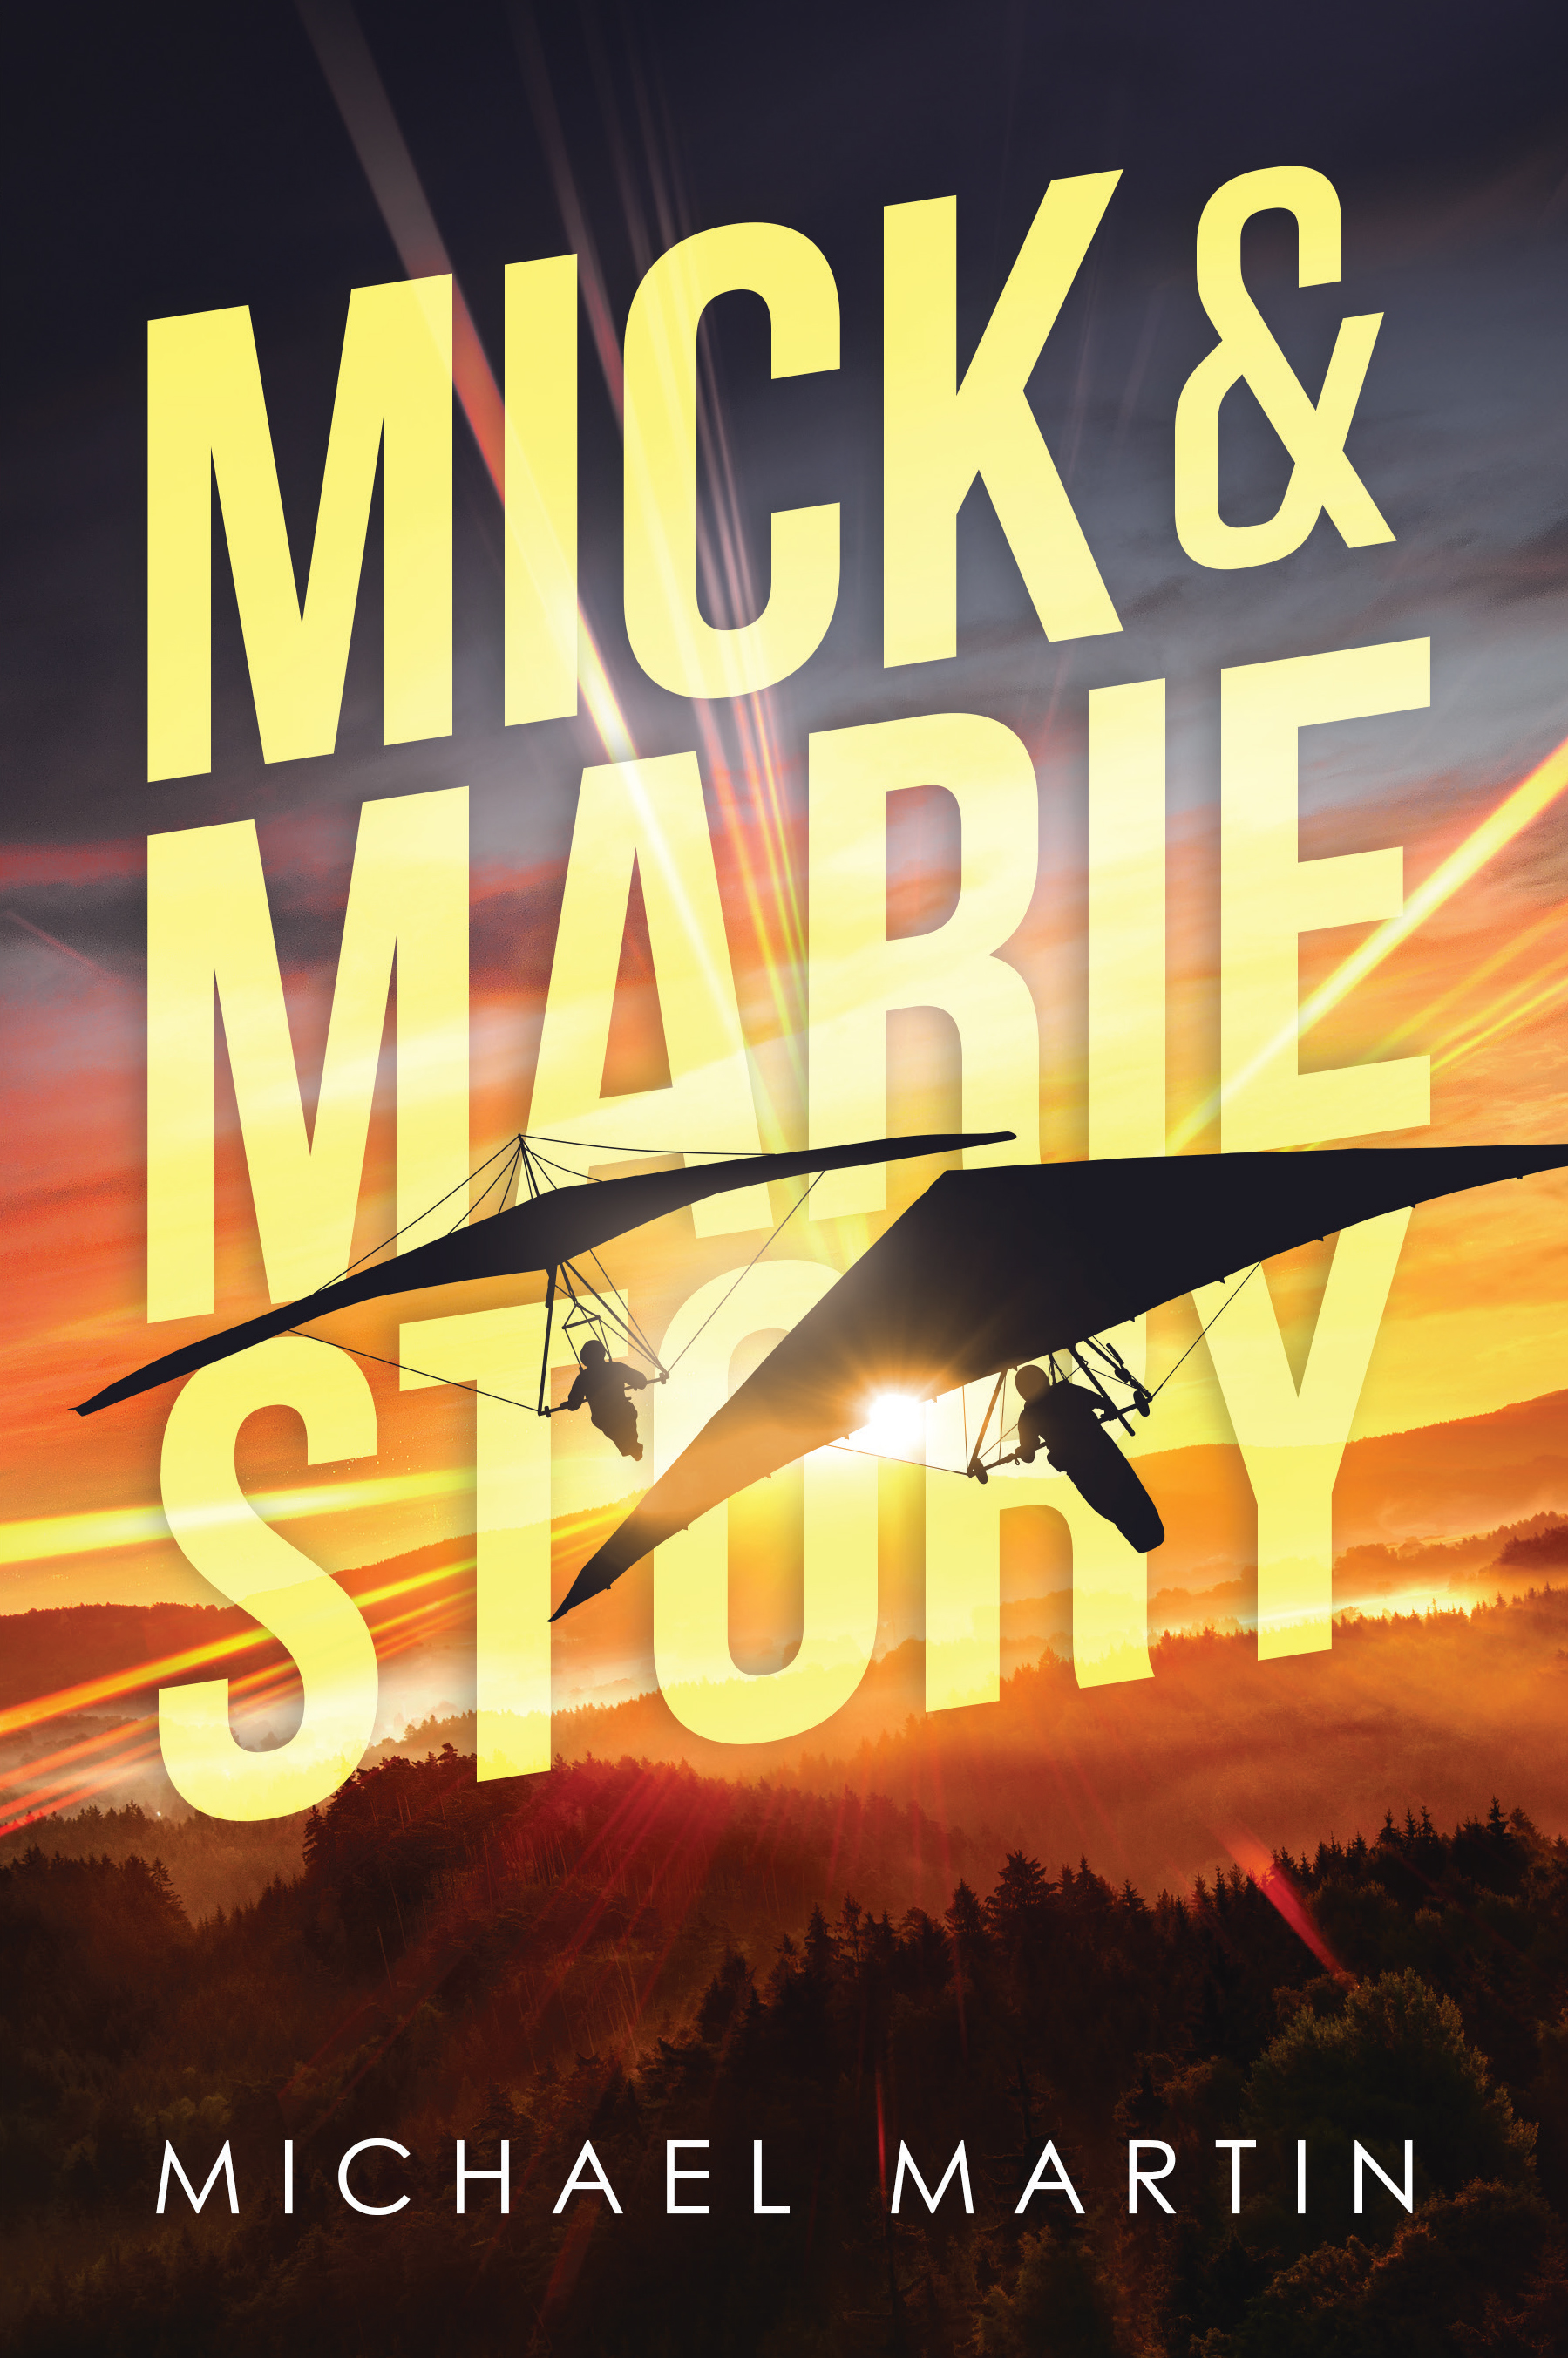 A Red Hot Story Penned by Author Michael Martin